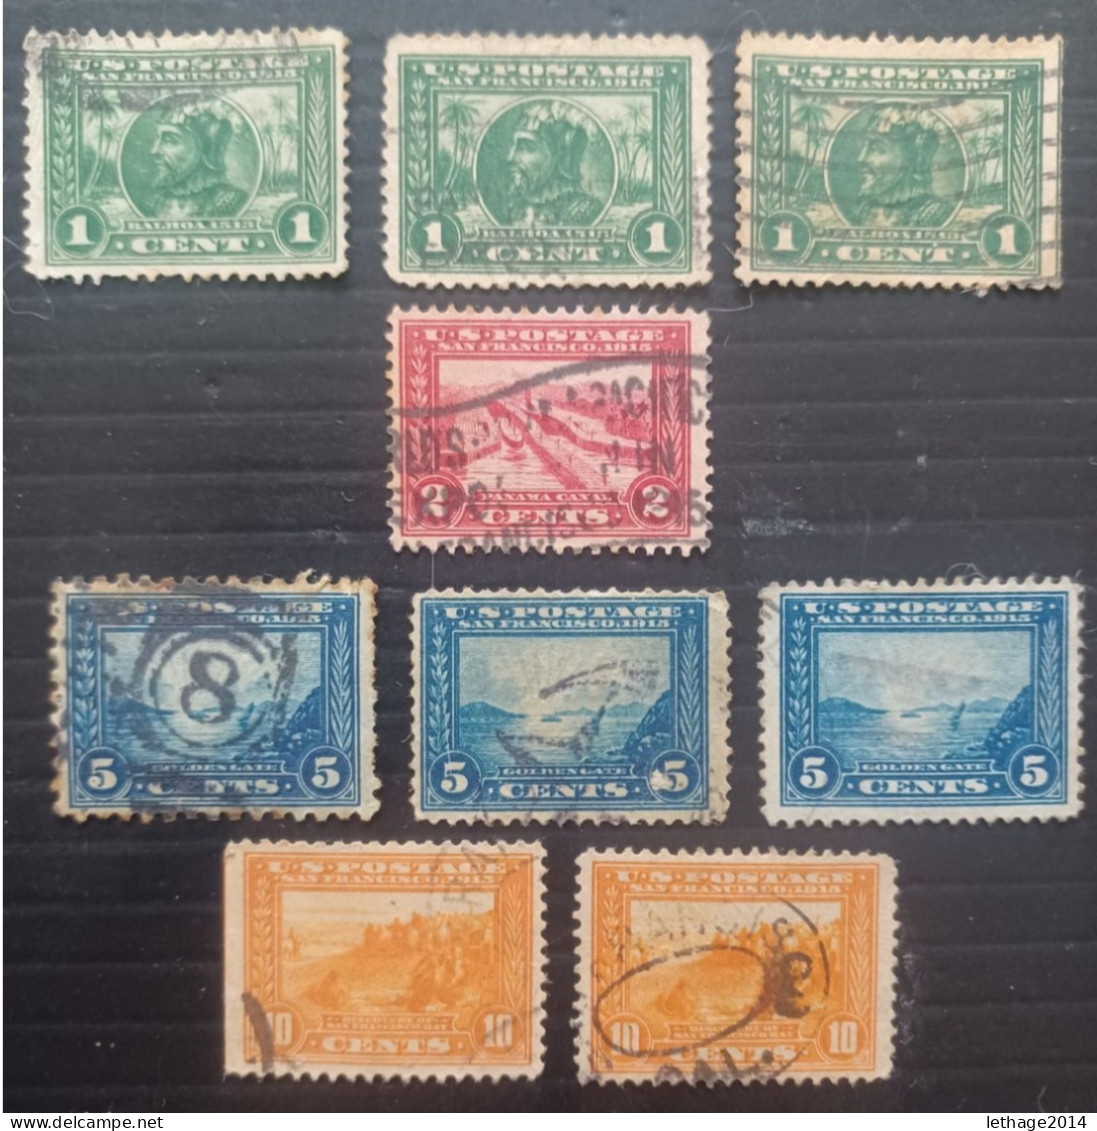 UNITED STATE 1913 PANAMA PACIFIC EXPOSITION SC N 397-398-399-400 DIFFERENT PERFORATIONS - Usados